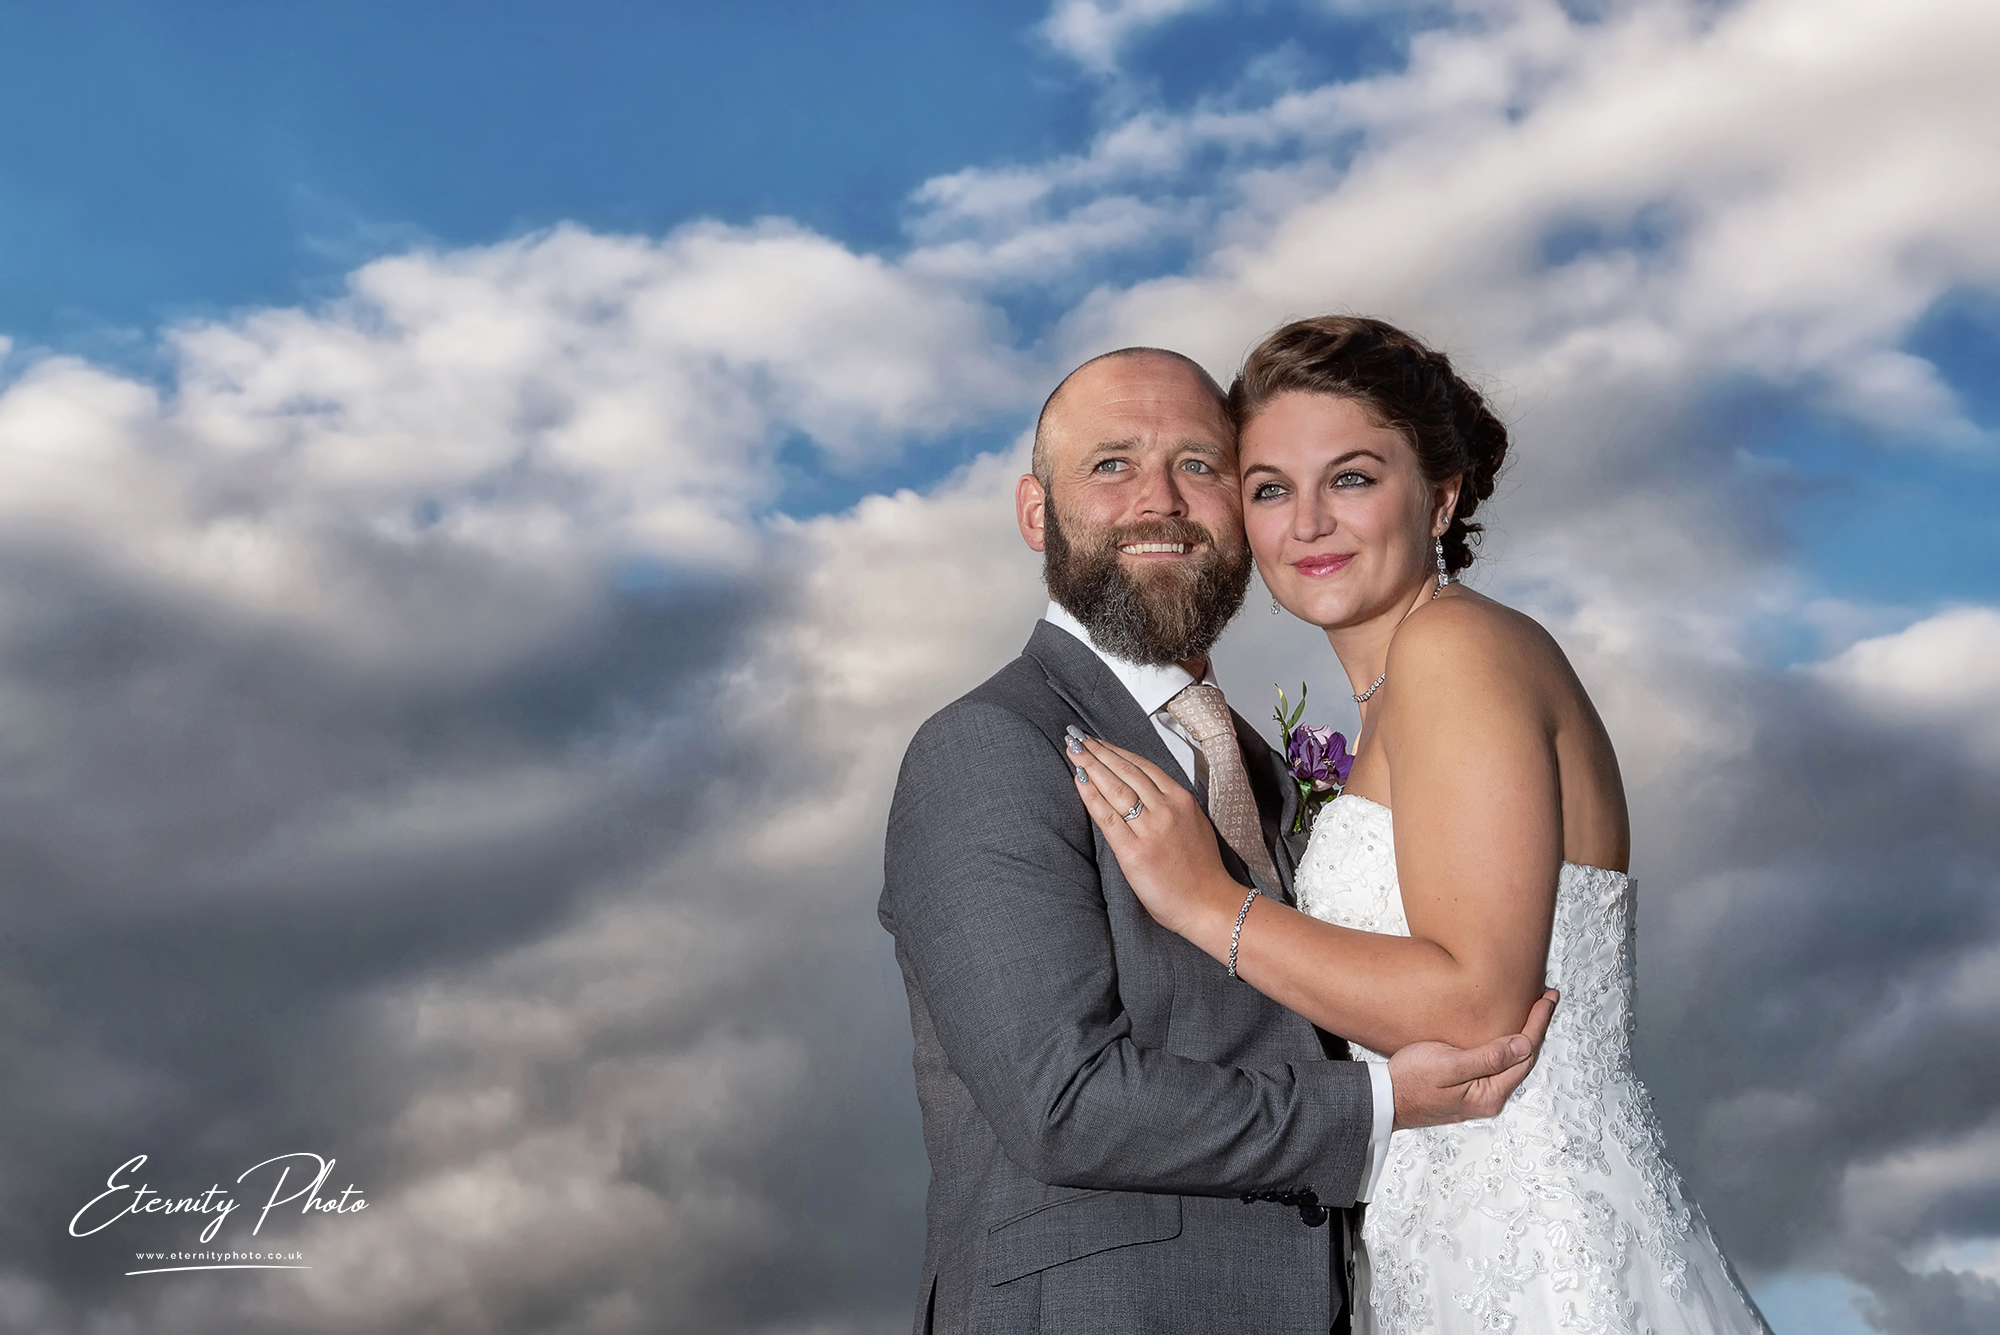 Bride and groom embrace under cloudy sky